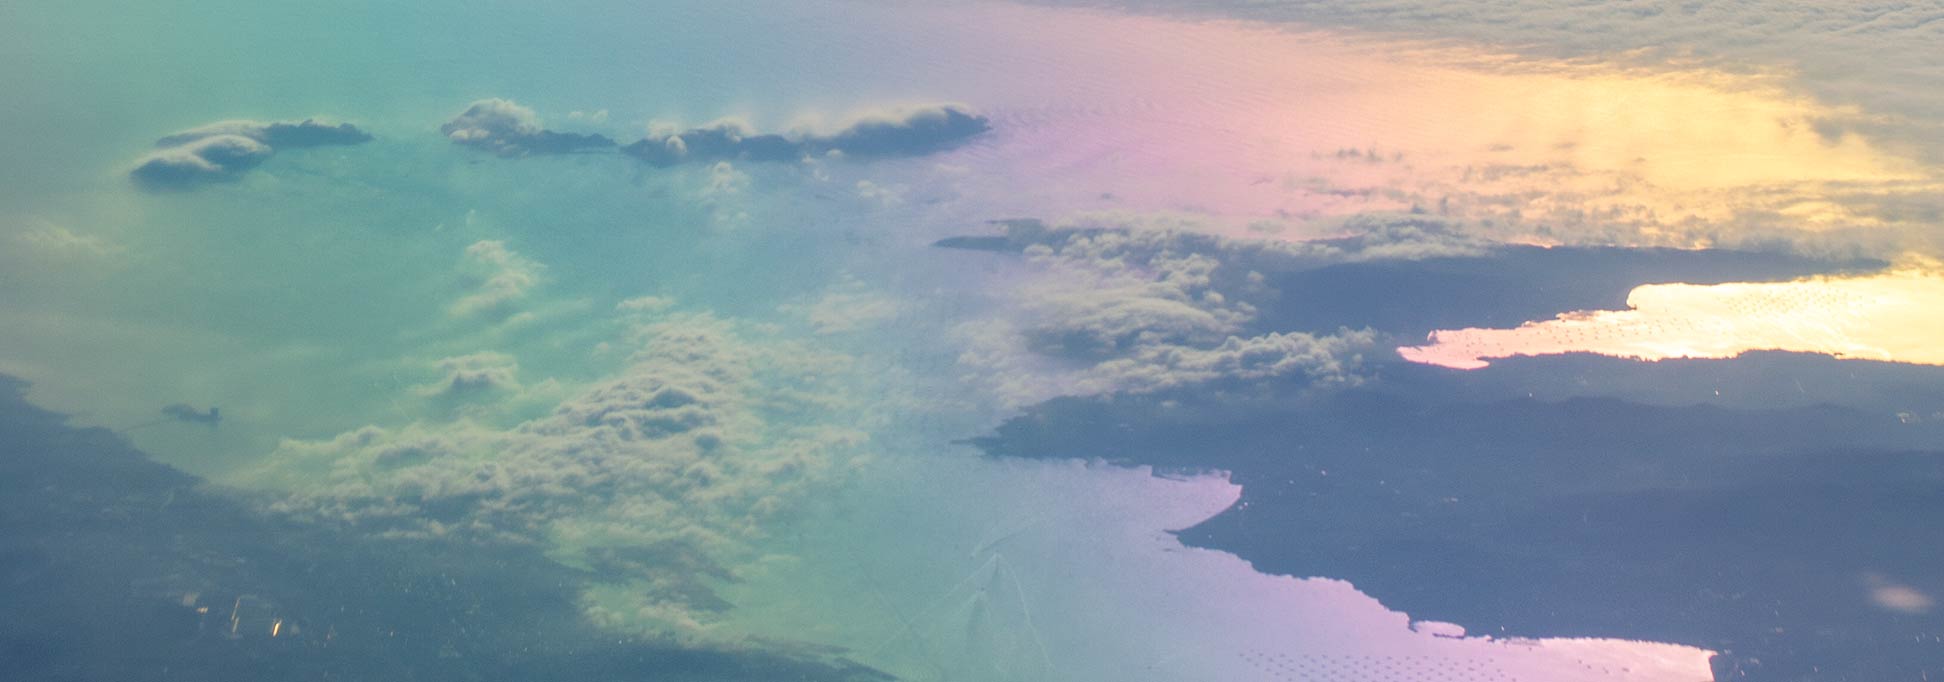 Over the clouds - Islands in the Sky